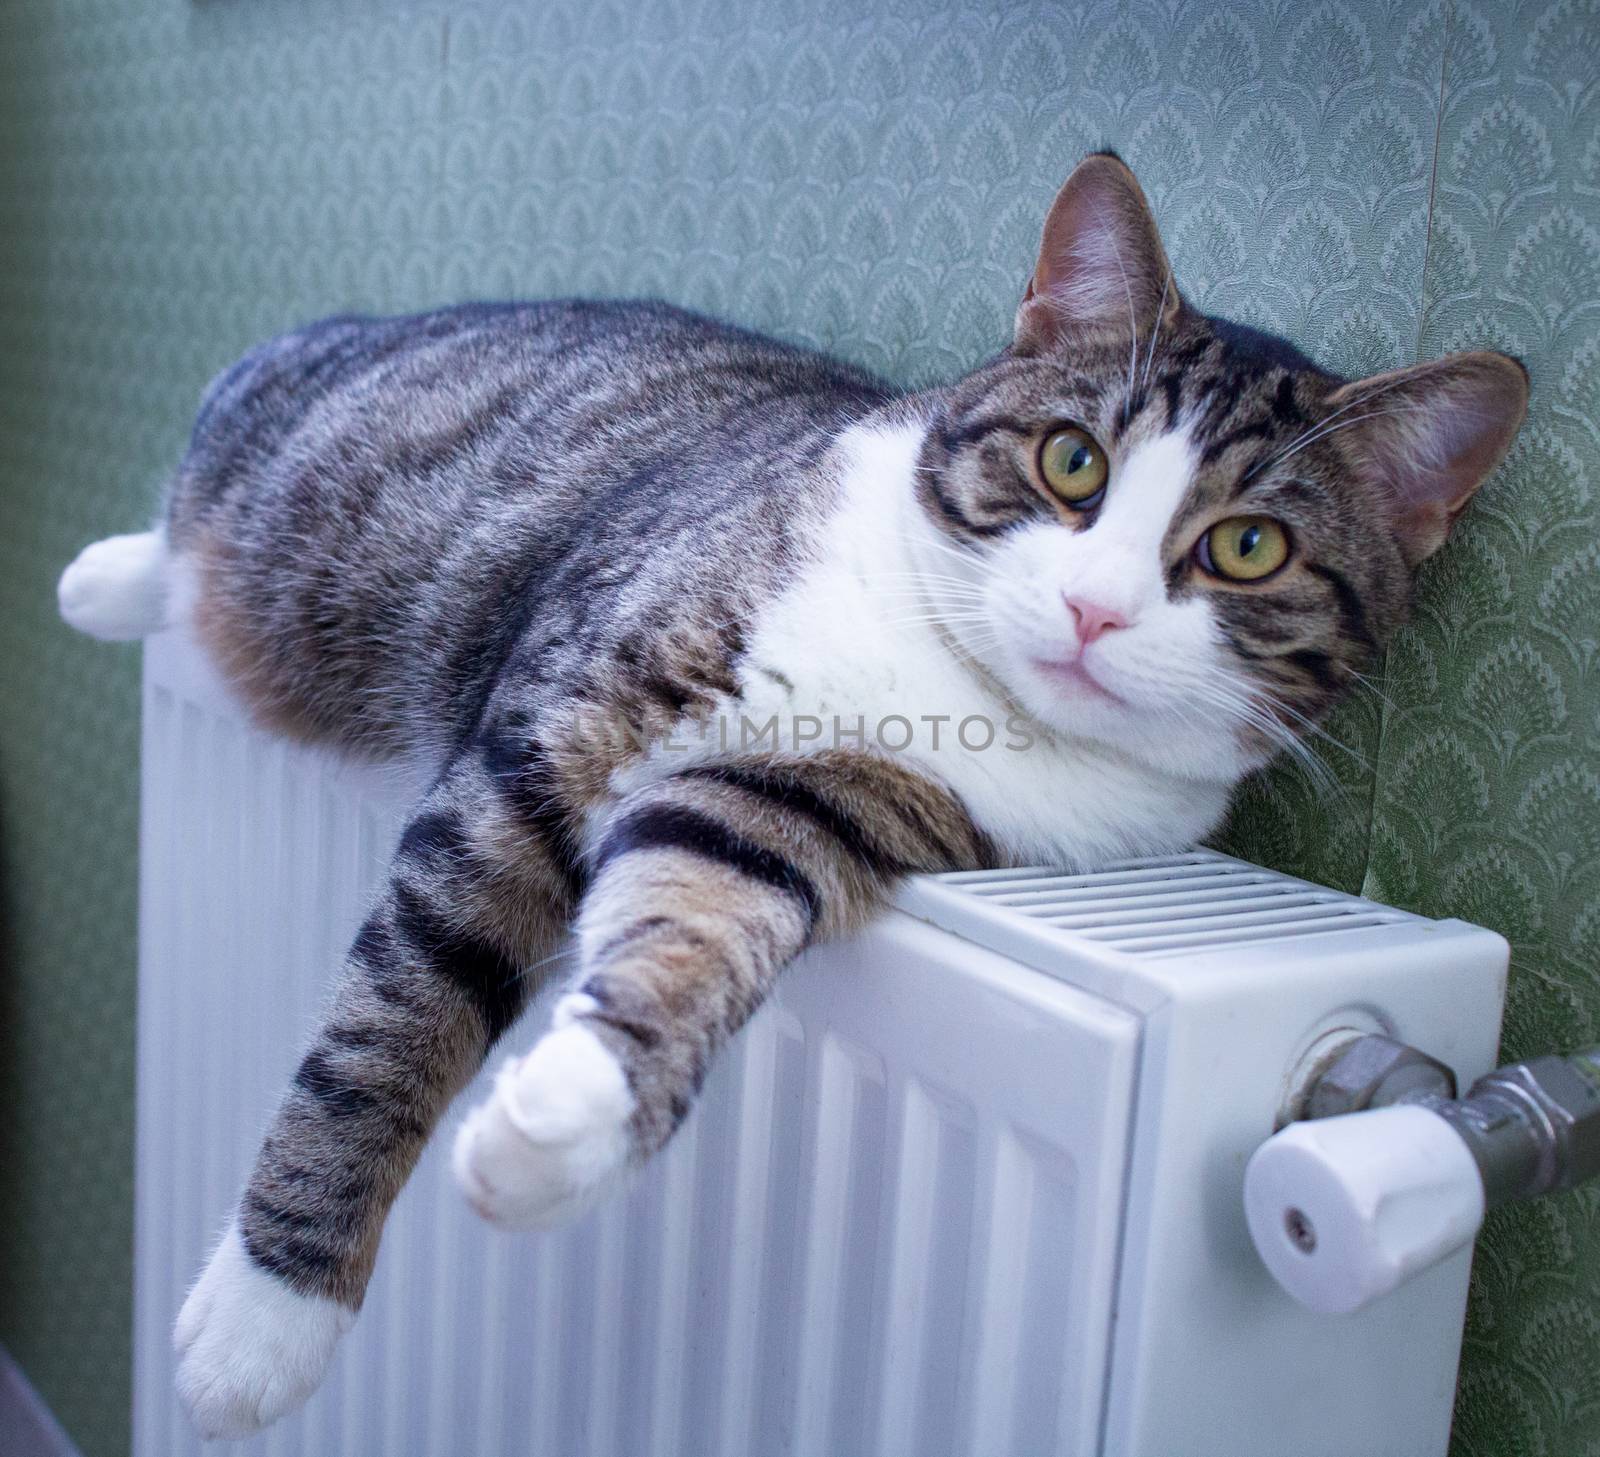 Furry striped pet cat lying on warm radiator rests and relaxes